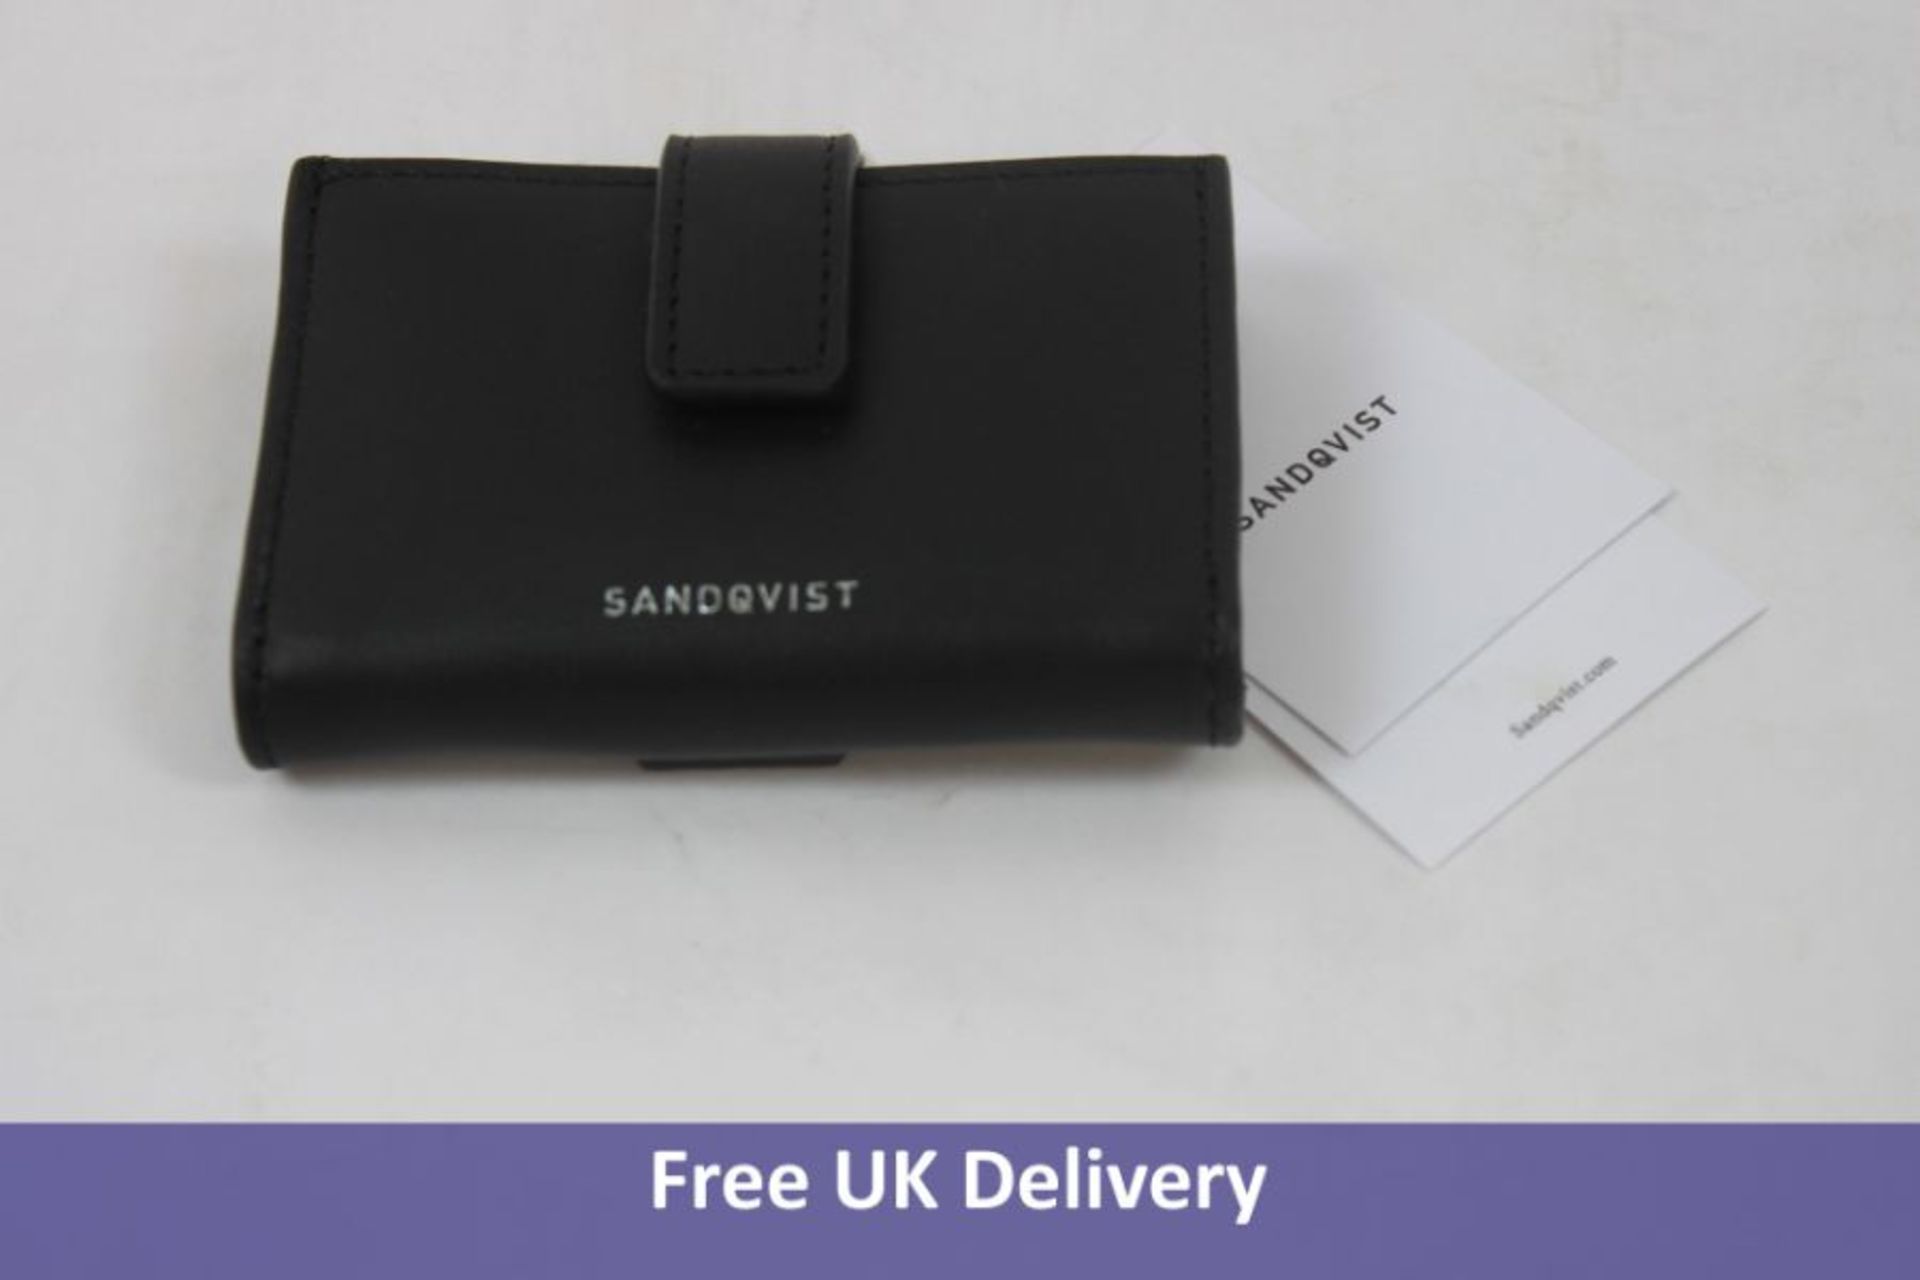 Two Sandqvist Finance Fashion Accessories to include, 1x Fred Card Case, Sunset Pink and 1x Rani Sma